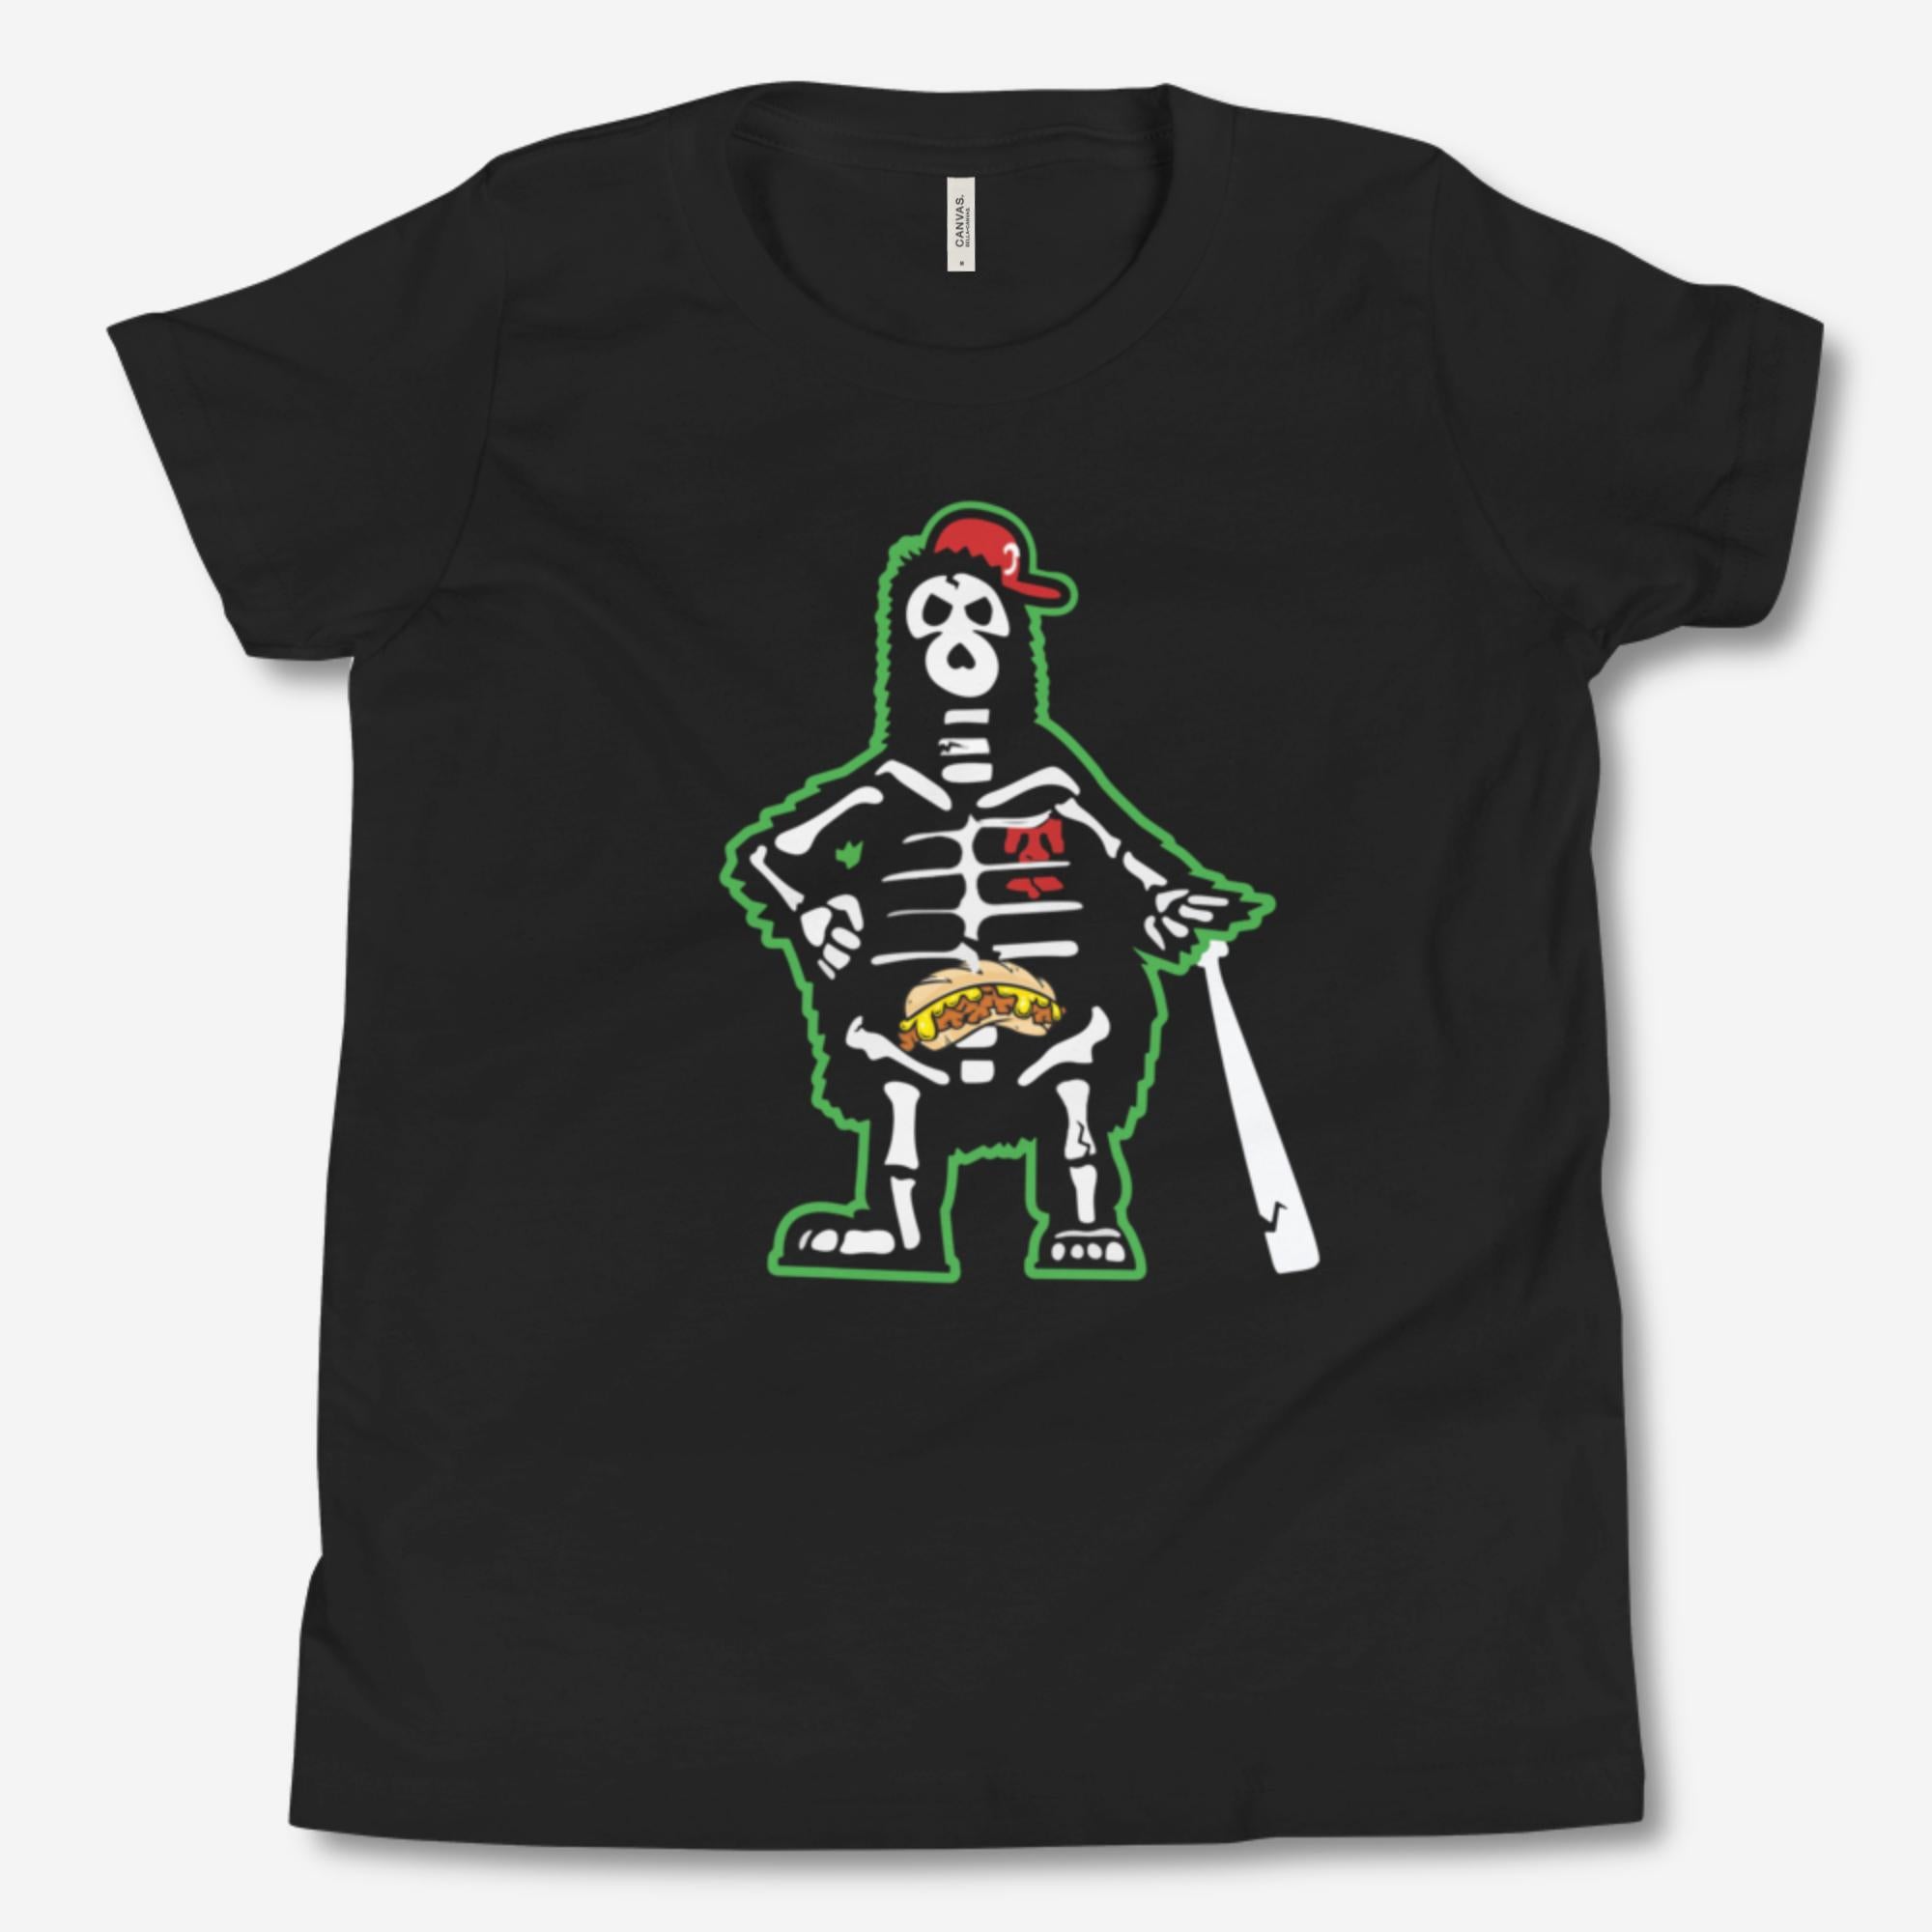 "Philly Phan to the Bone" Youth Tee